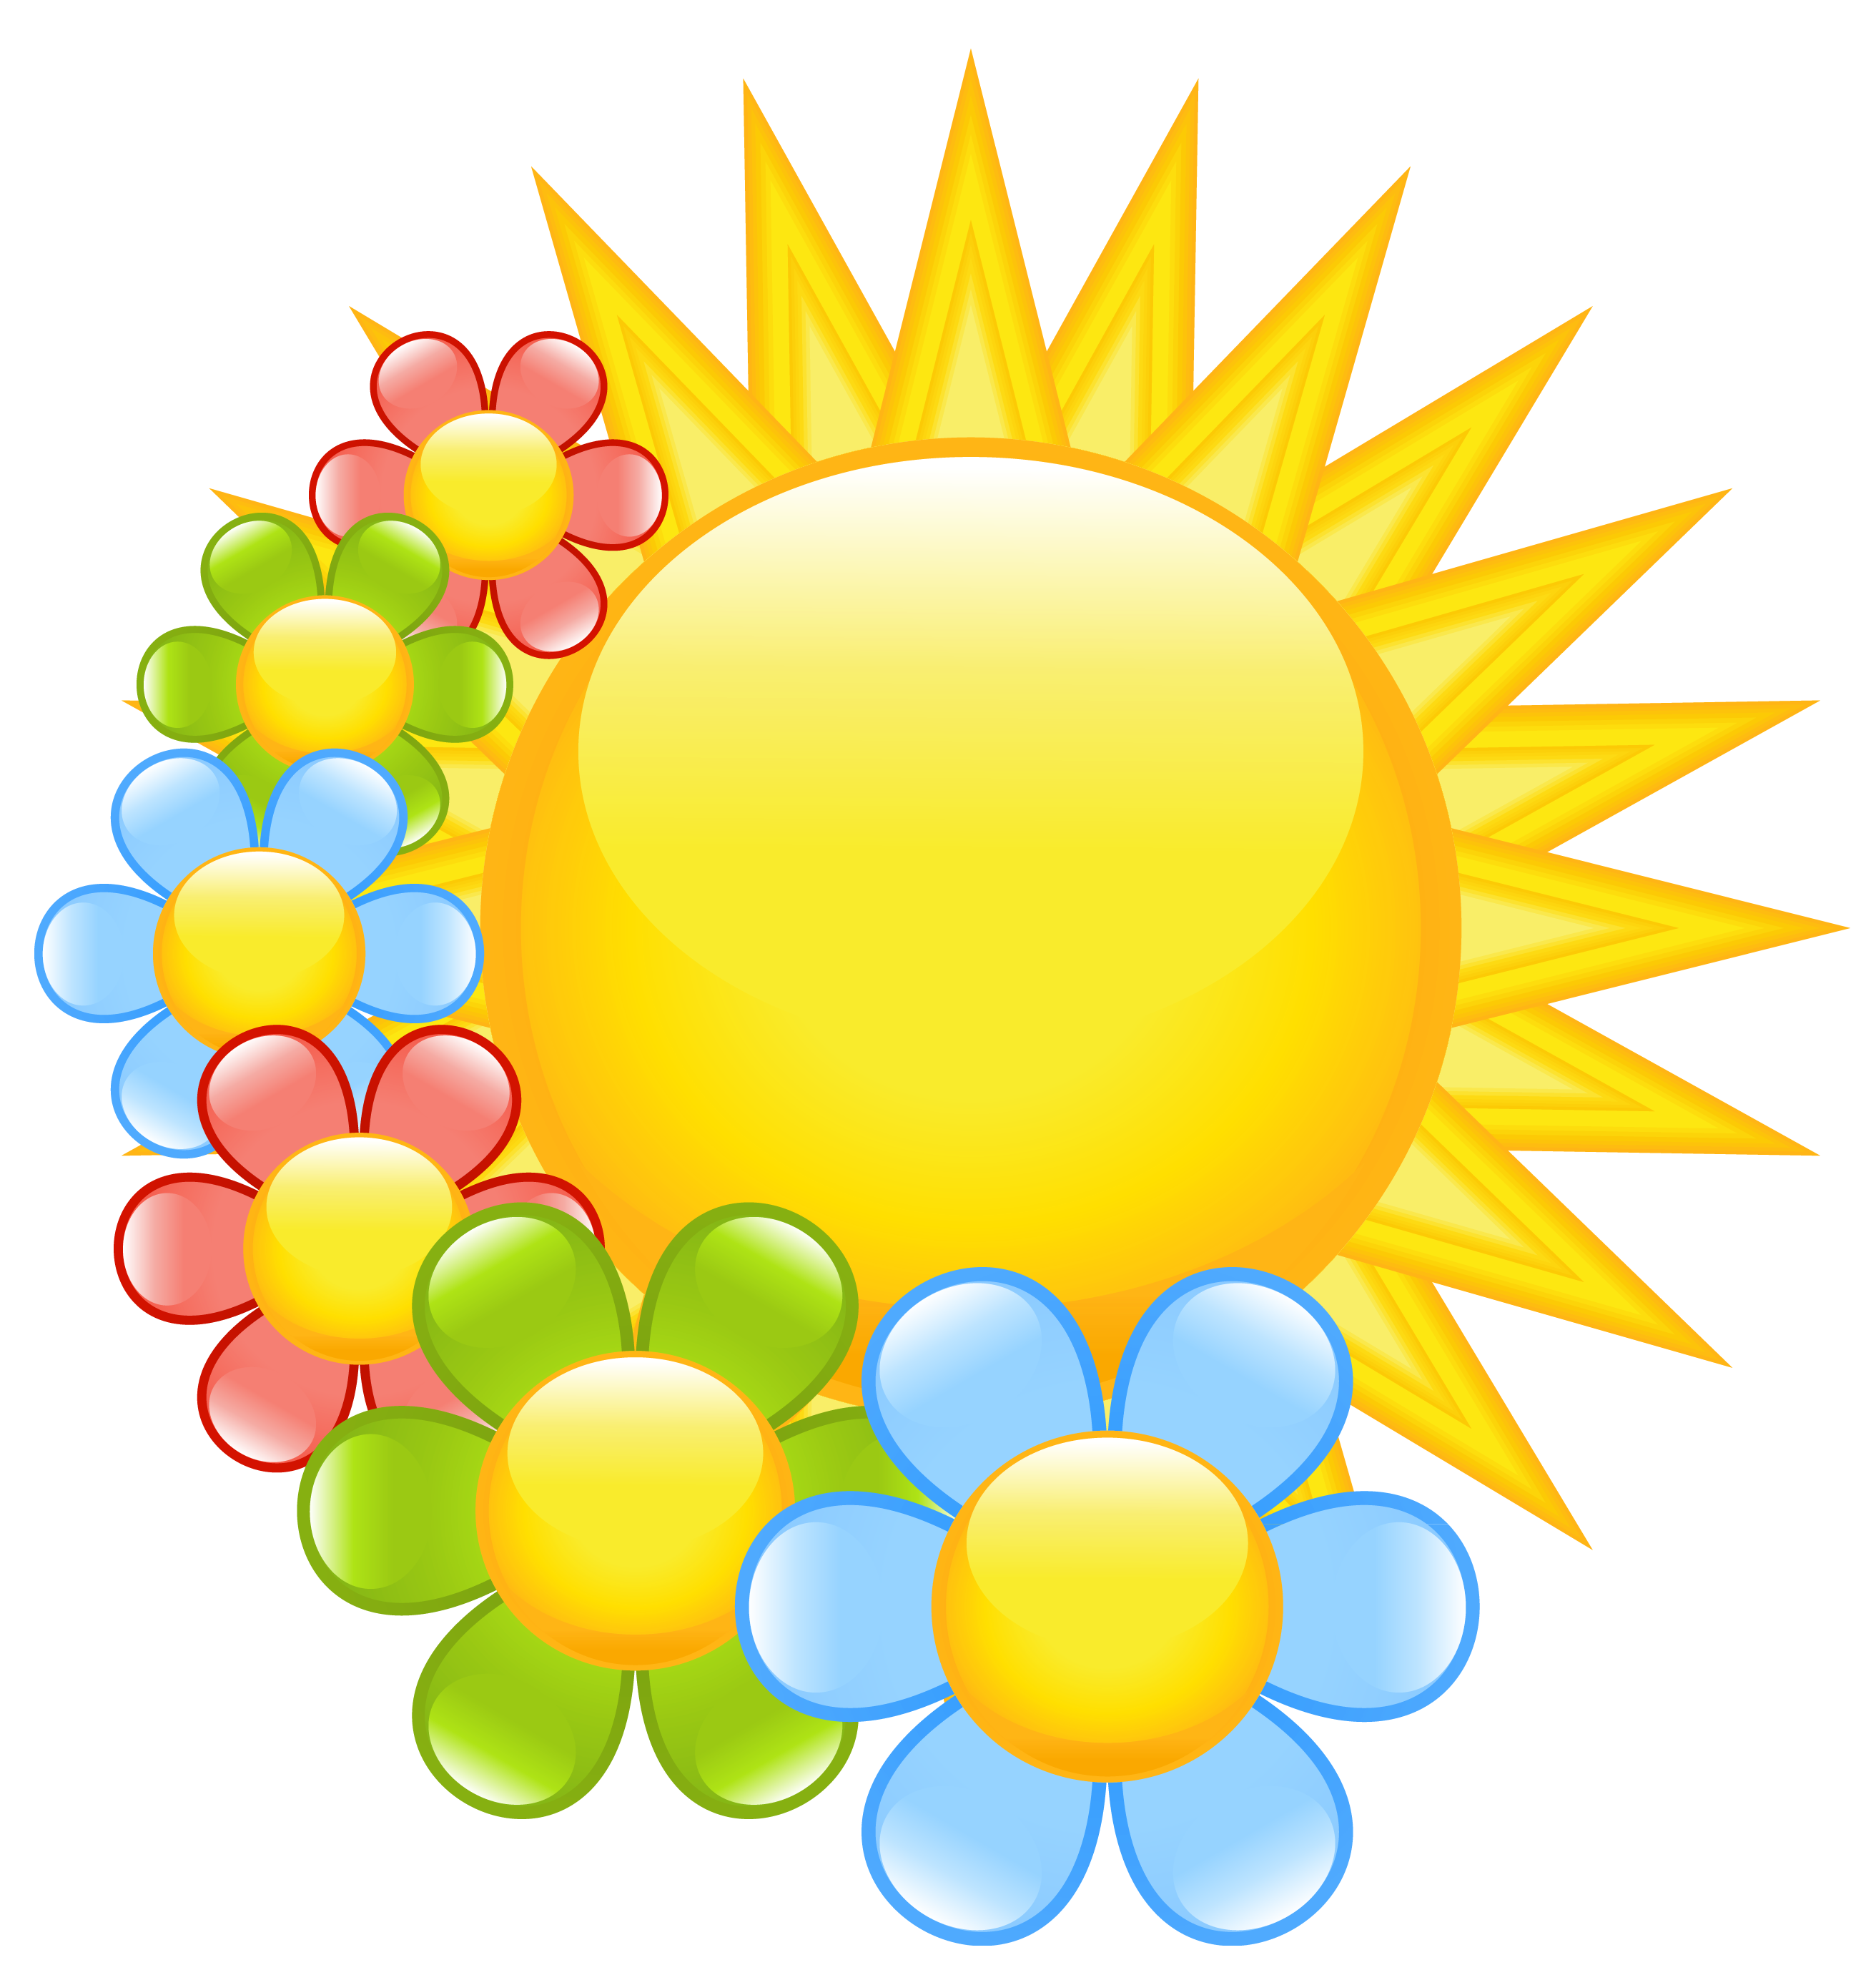 Spring flower spring sun with flowers clipart 0